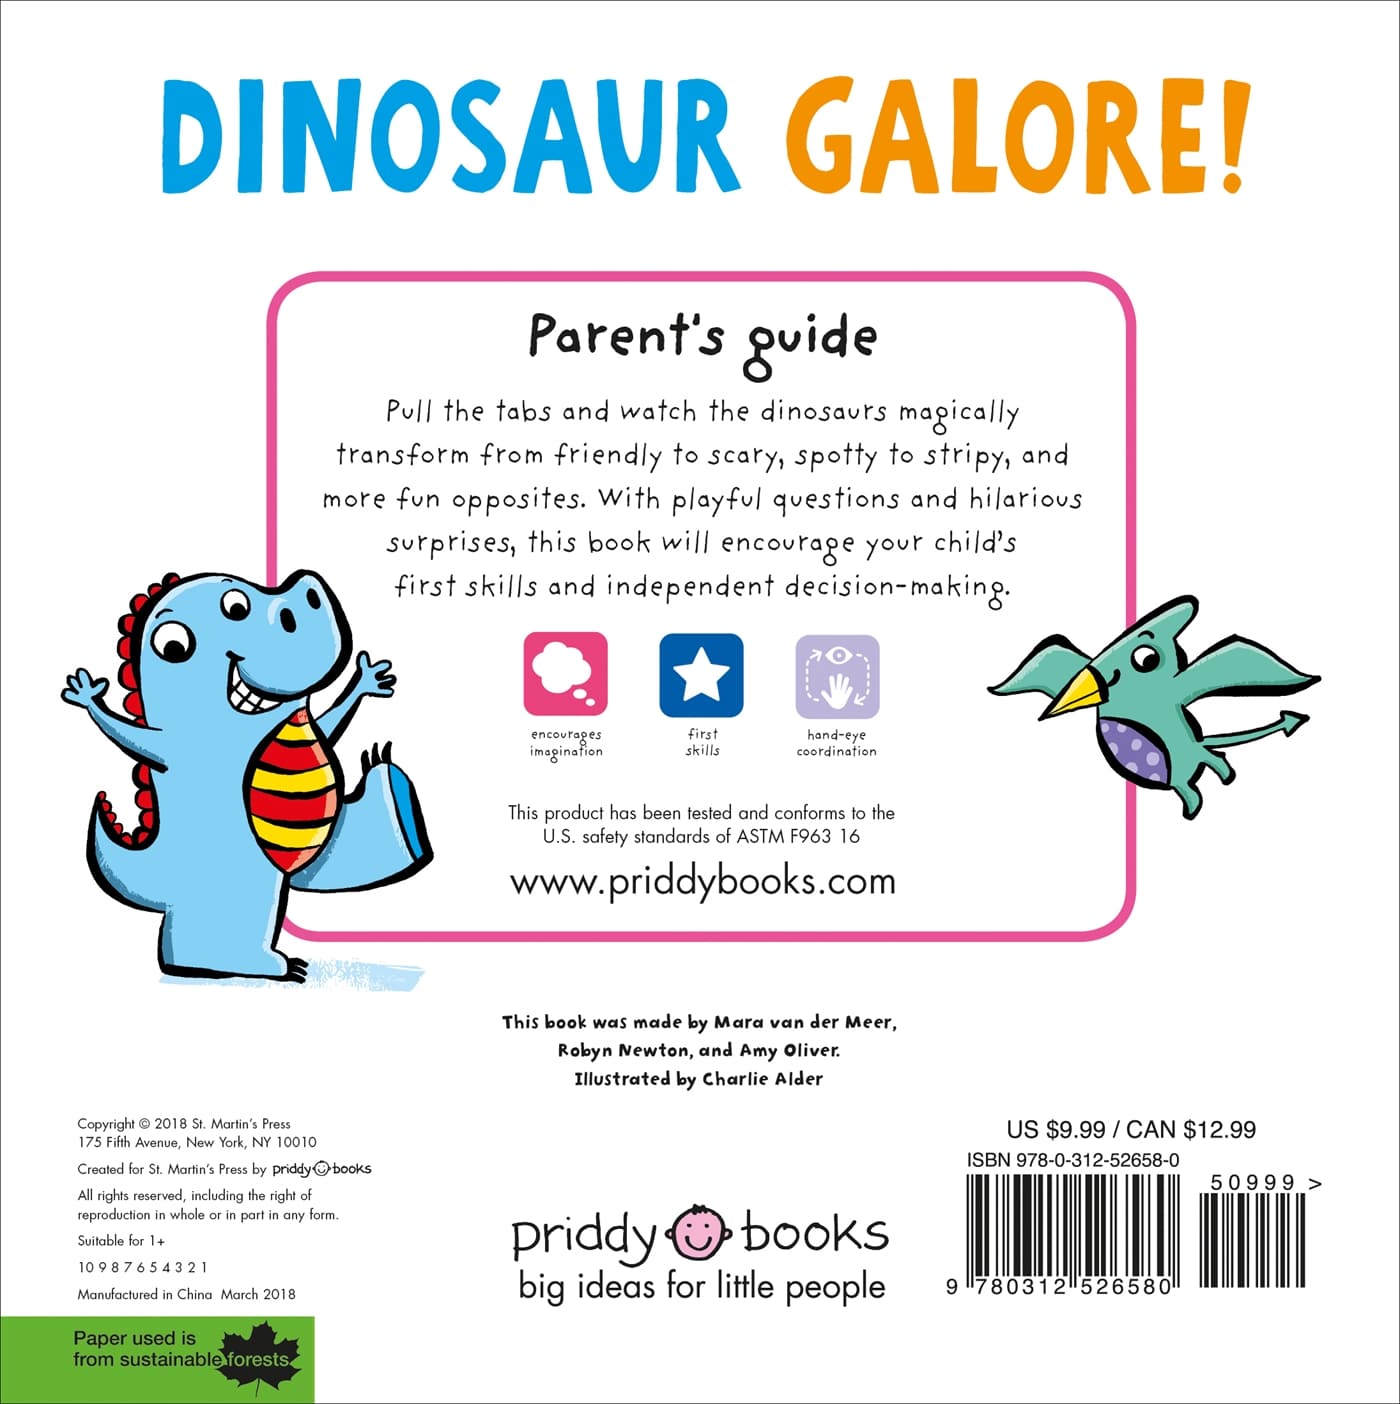 changing-picture-book-dinosaur-galore_1263226.jpg